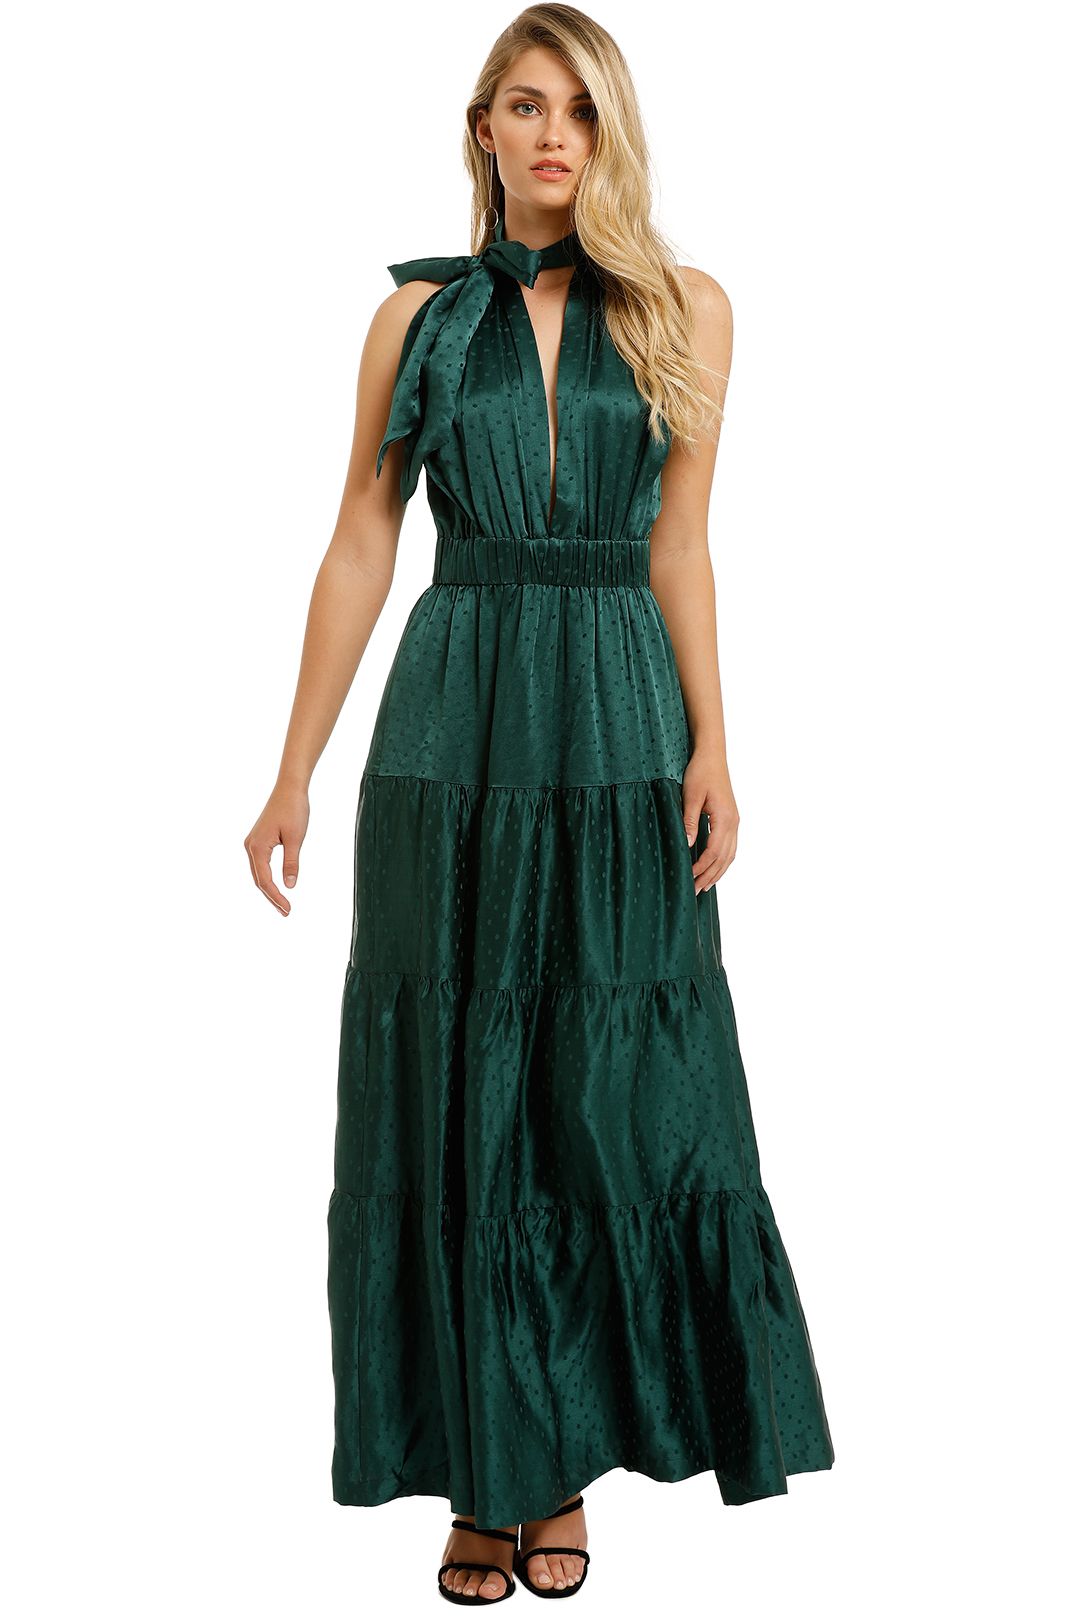 Essence Spot Dress in Emerald by KITX for Hire | GlamCorner